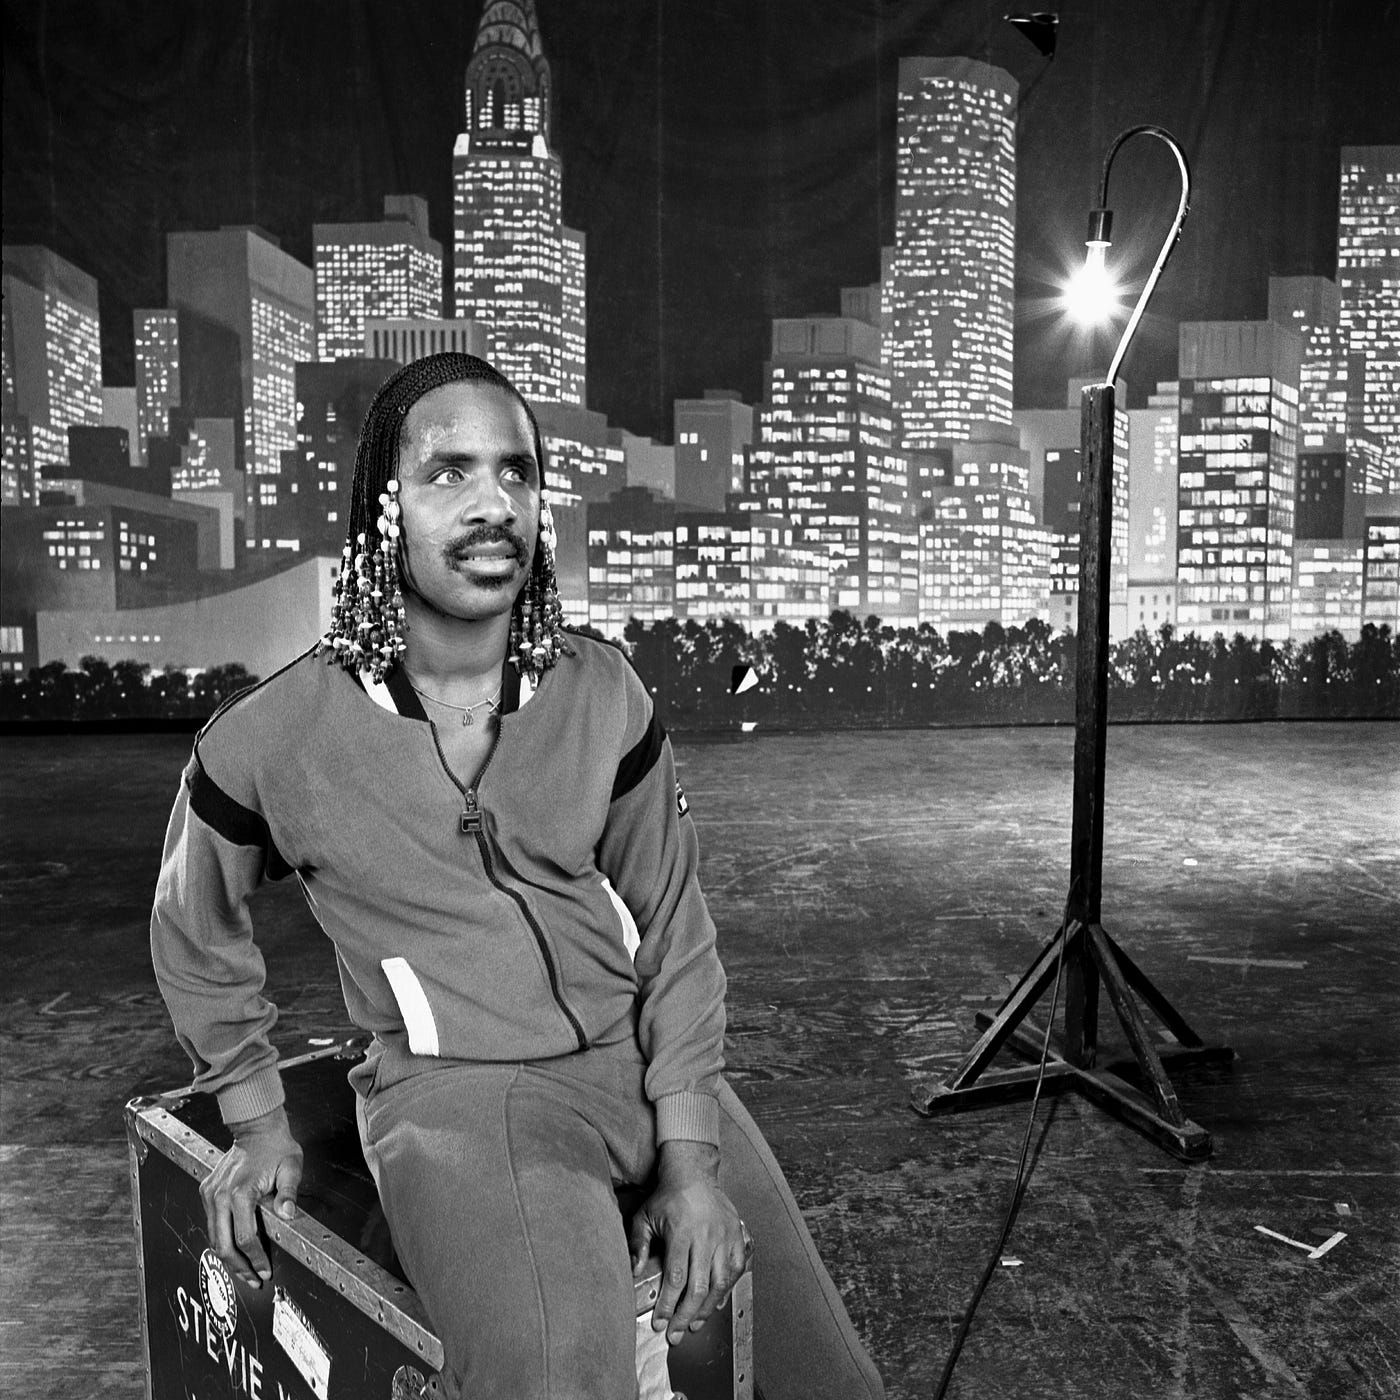 Blind Luck. Being Photographed by Stevie Wonder | by Tom Zimberoff | Medium